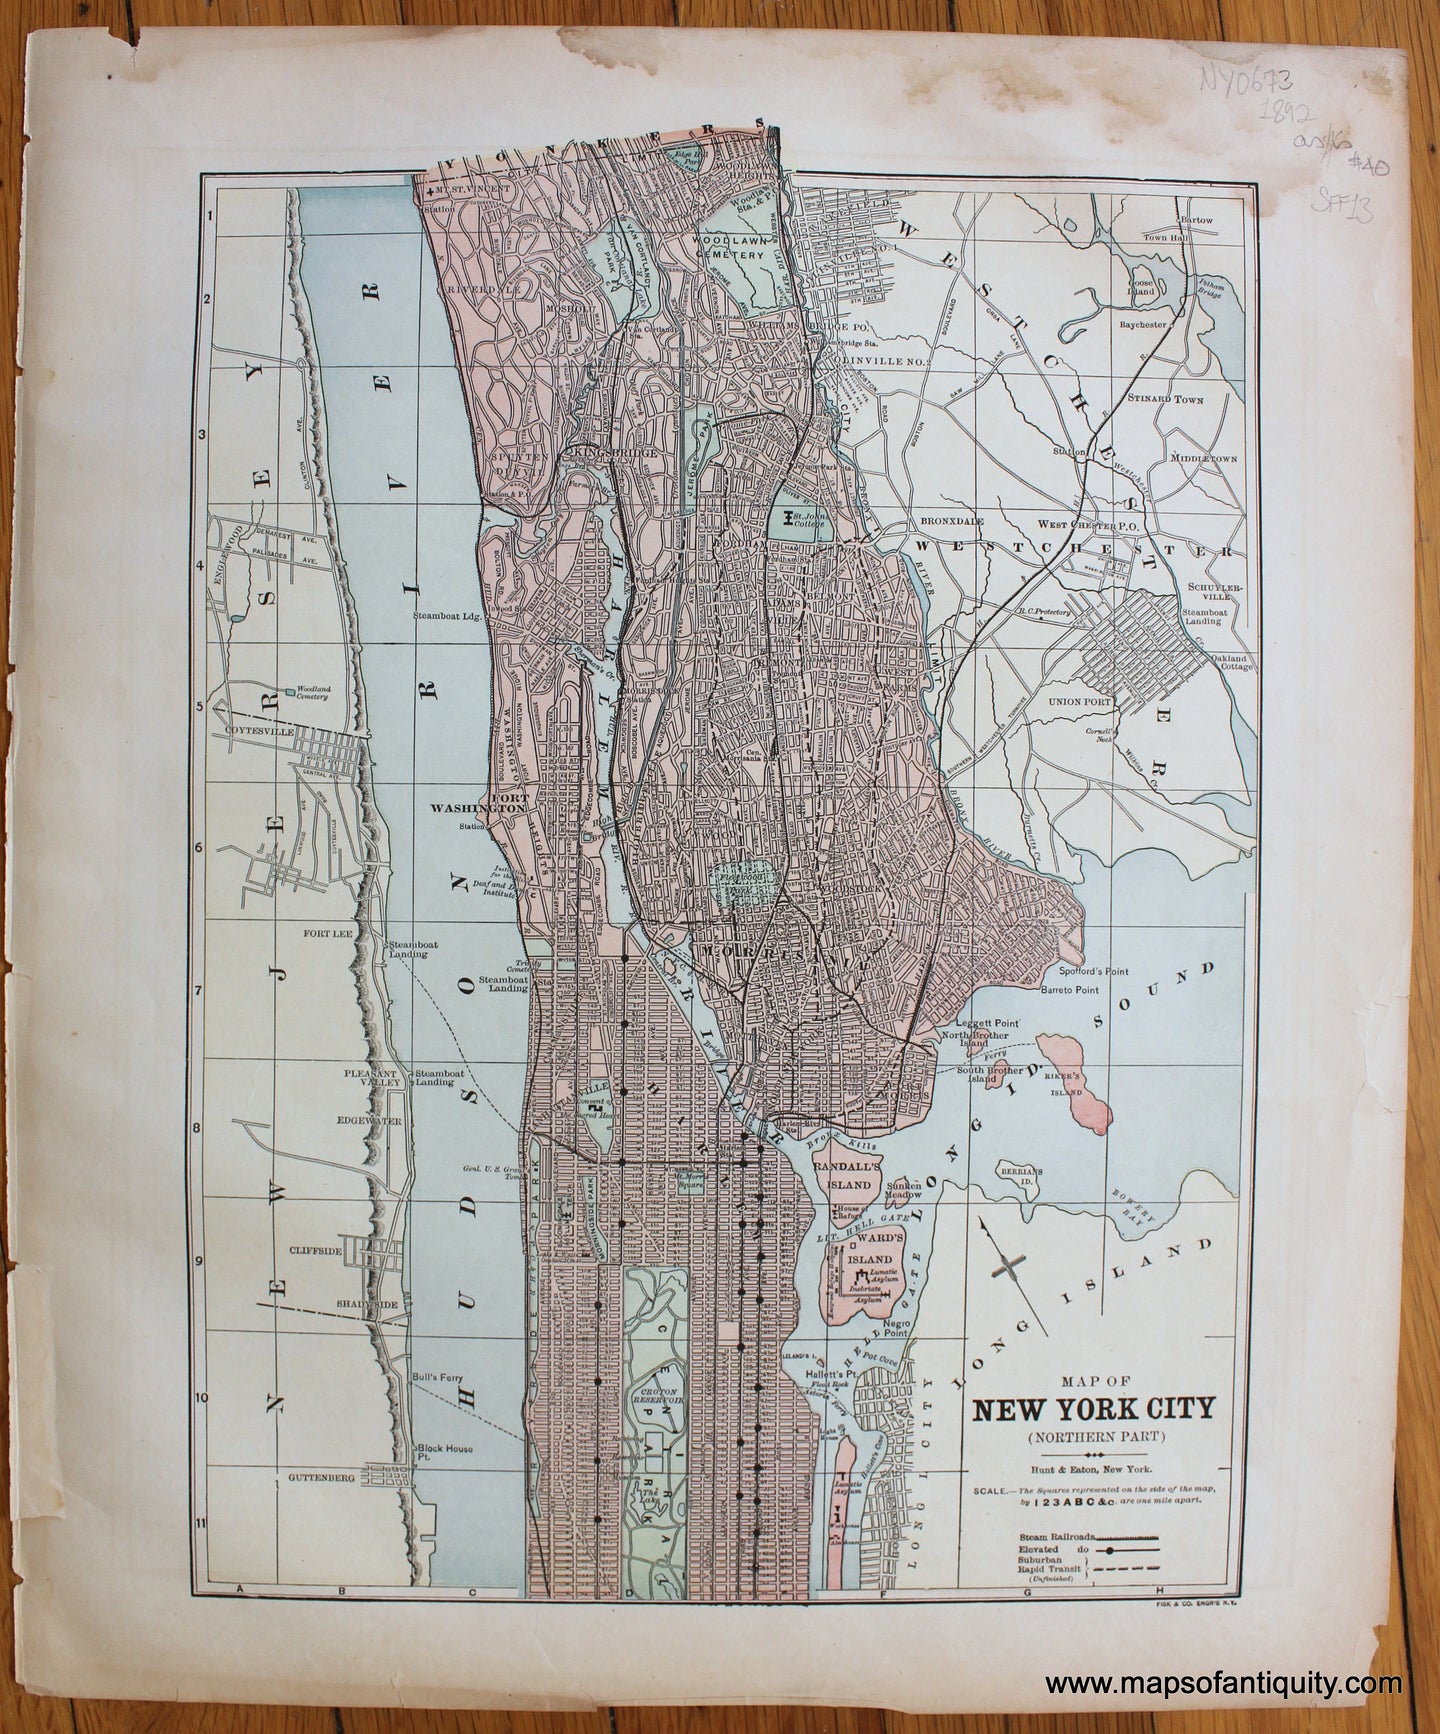 Antique-Map-of-New-York-City-Northern-Part-North-NYC-Hunt-&-and-Eaton-1892-1890s-1800s-Late-19th-Century-Maps-of-Antiquity